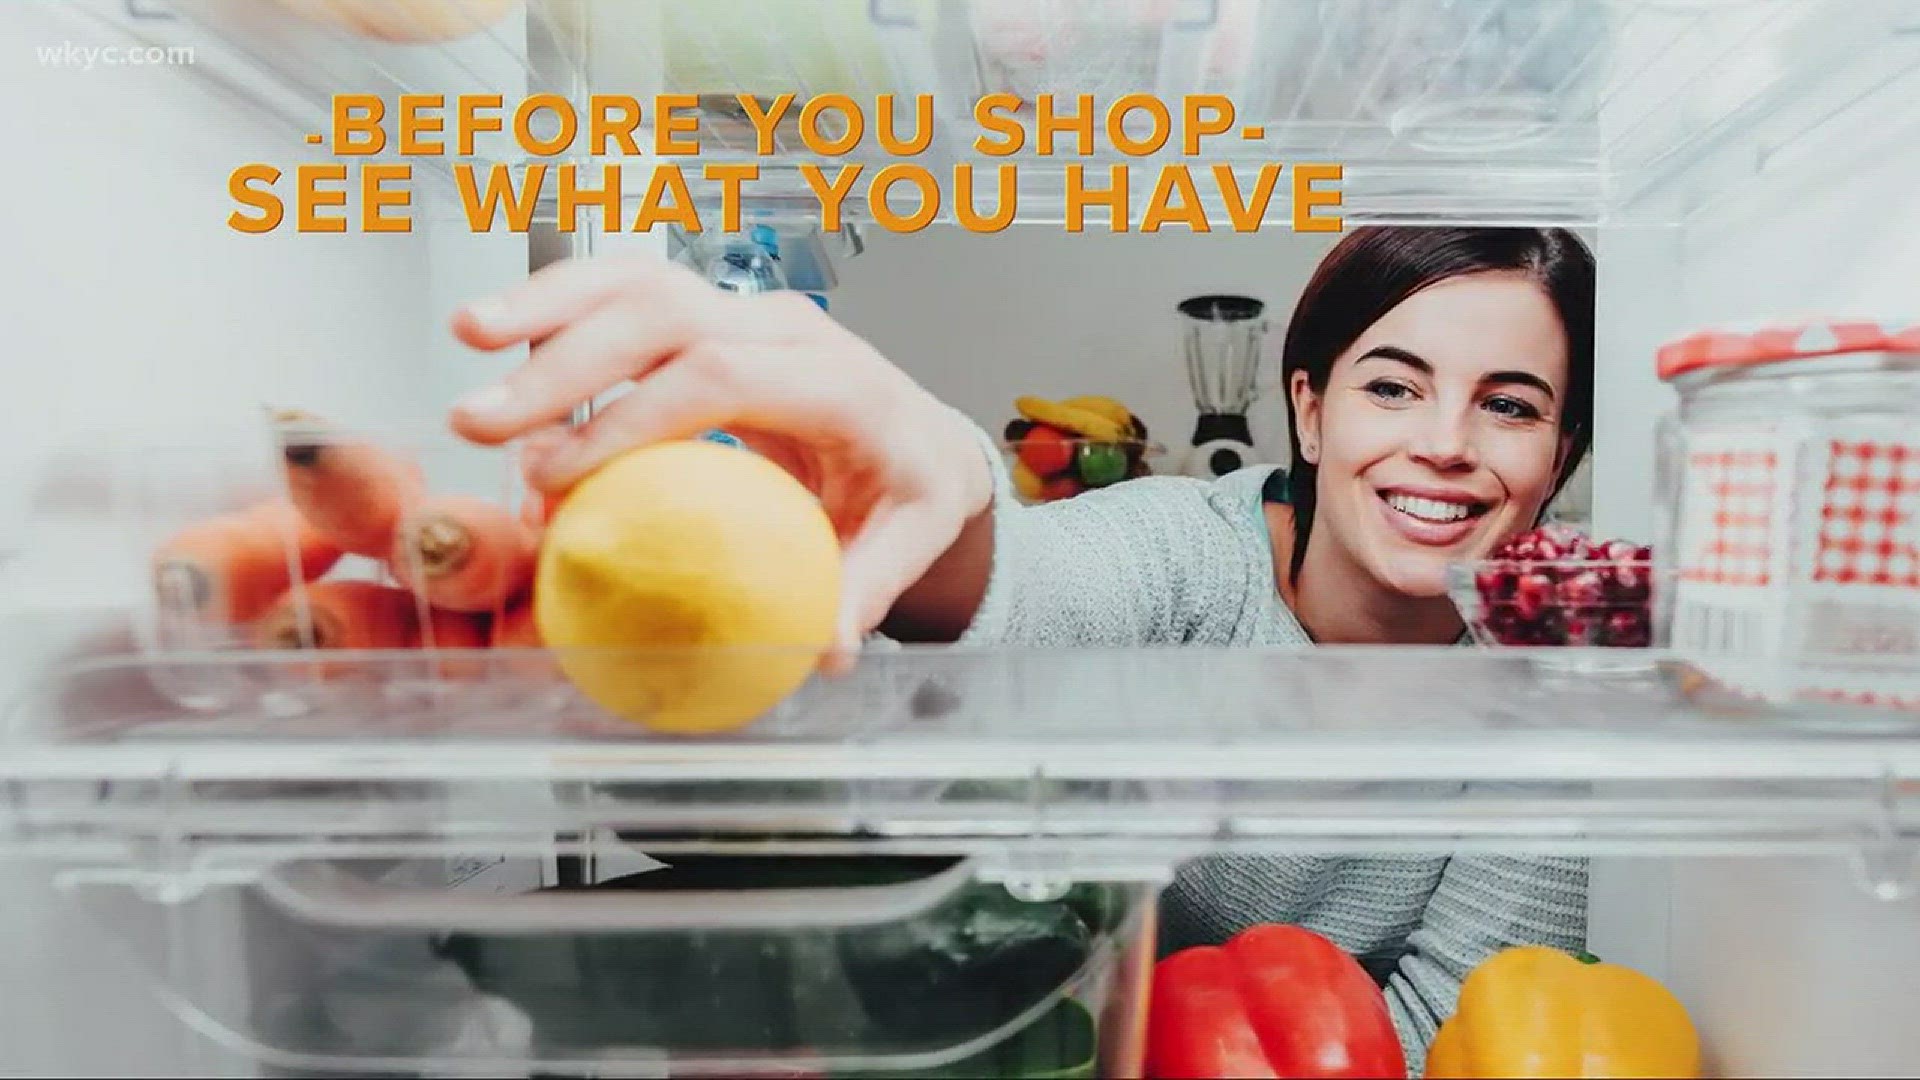 Keep your money out of the trash can with a better plan for grocery shopping.